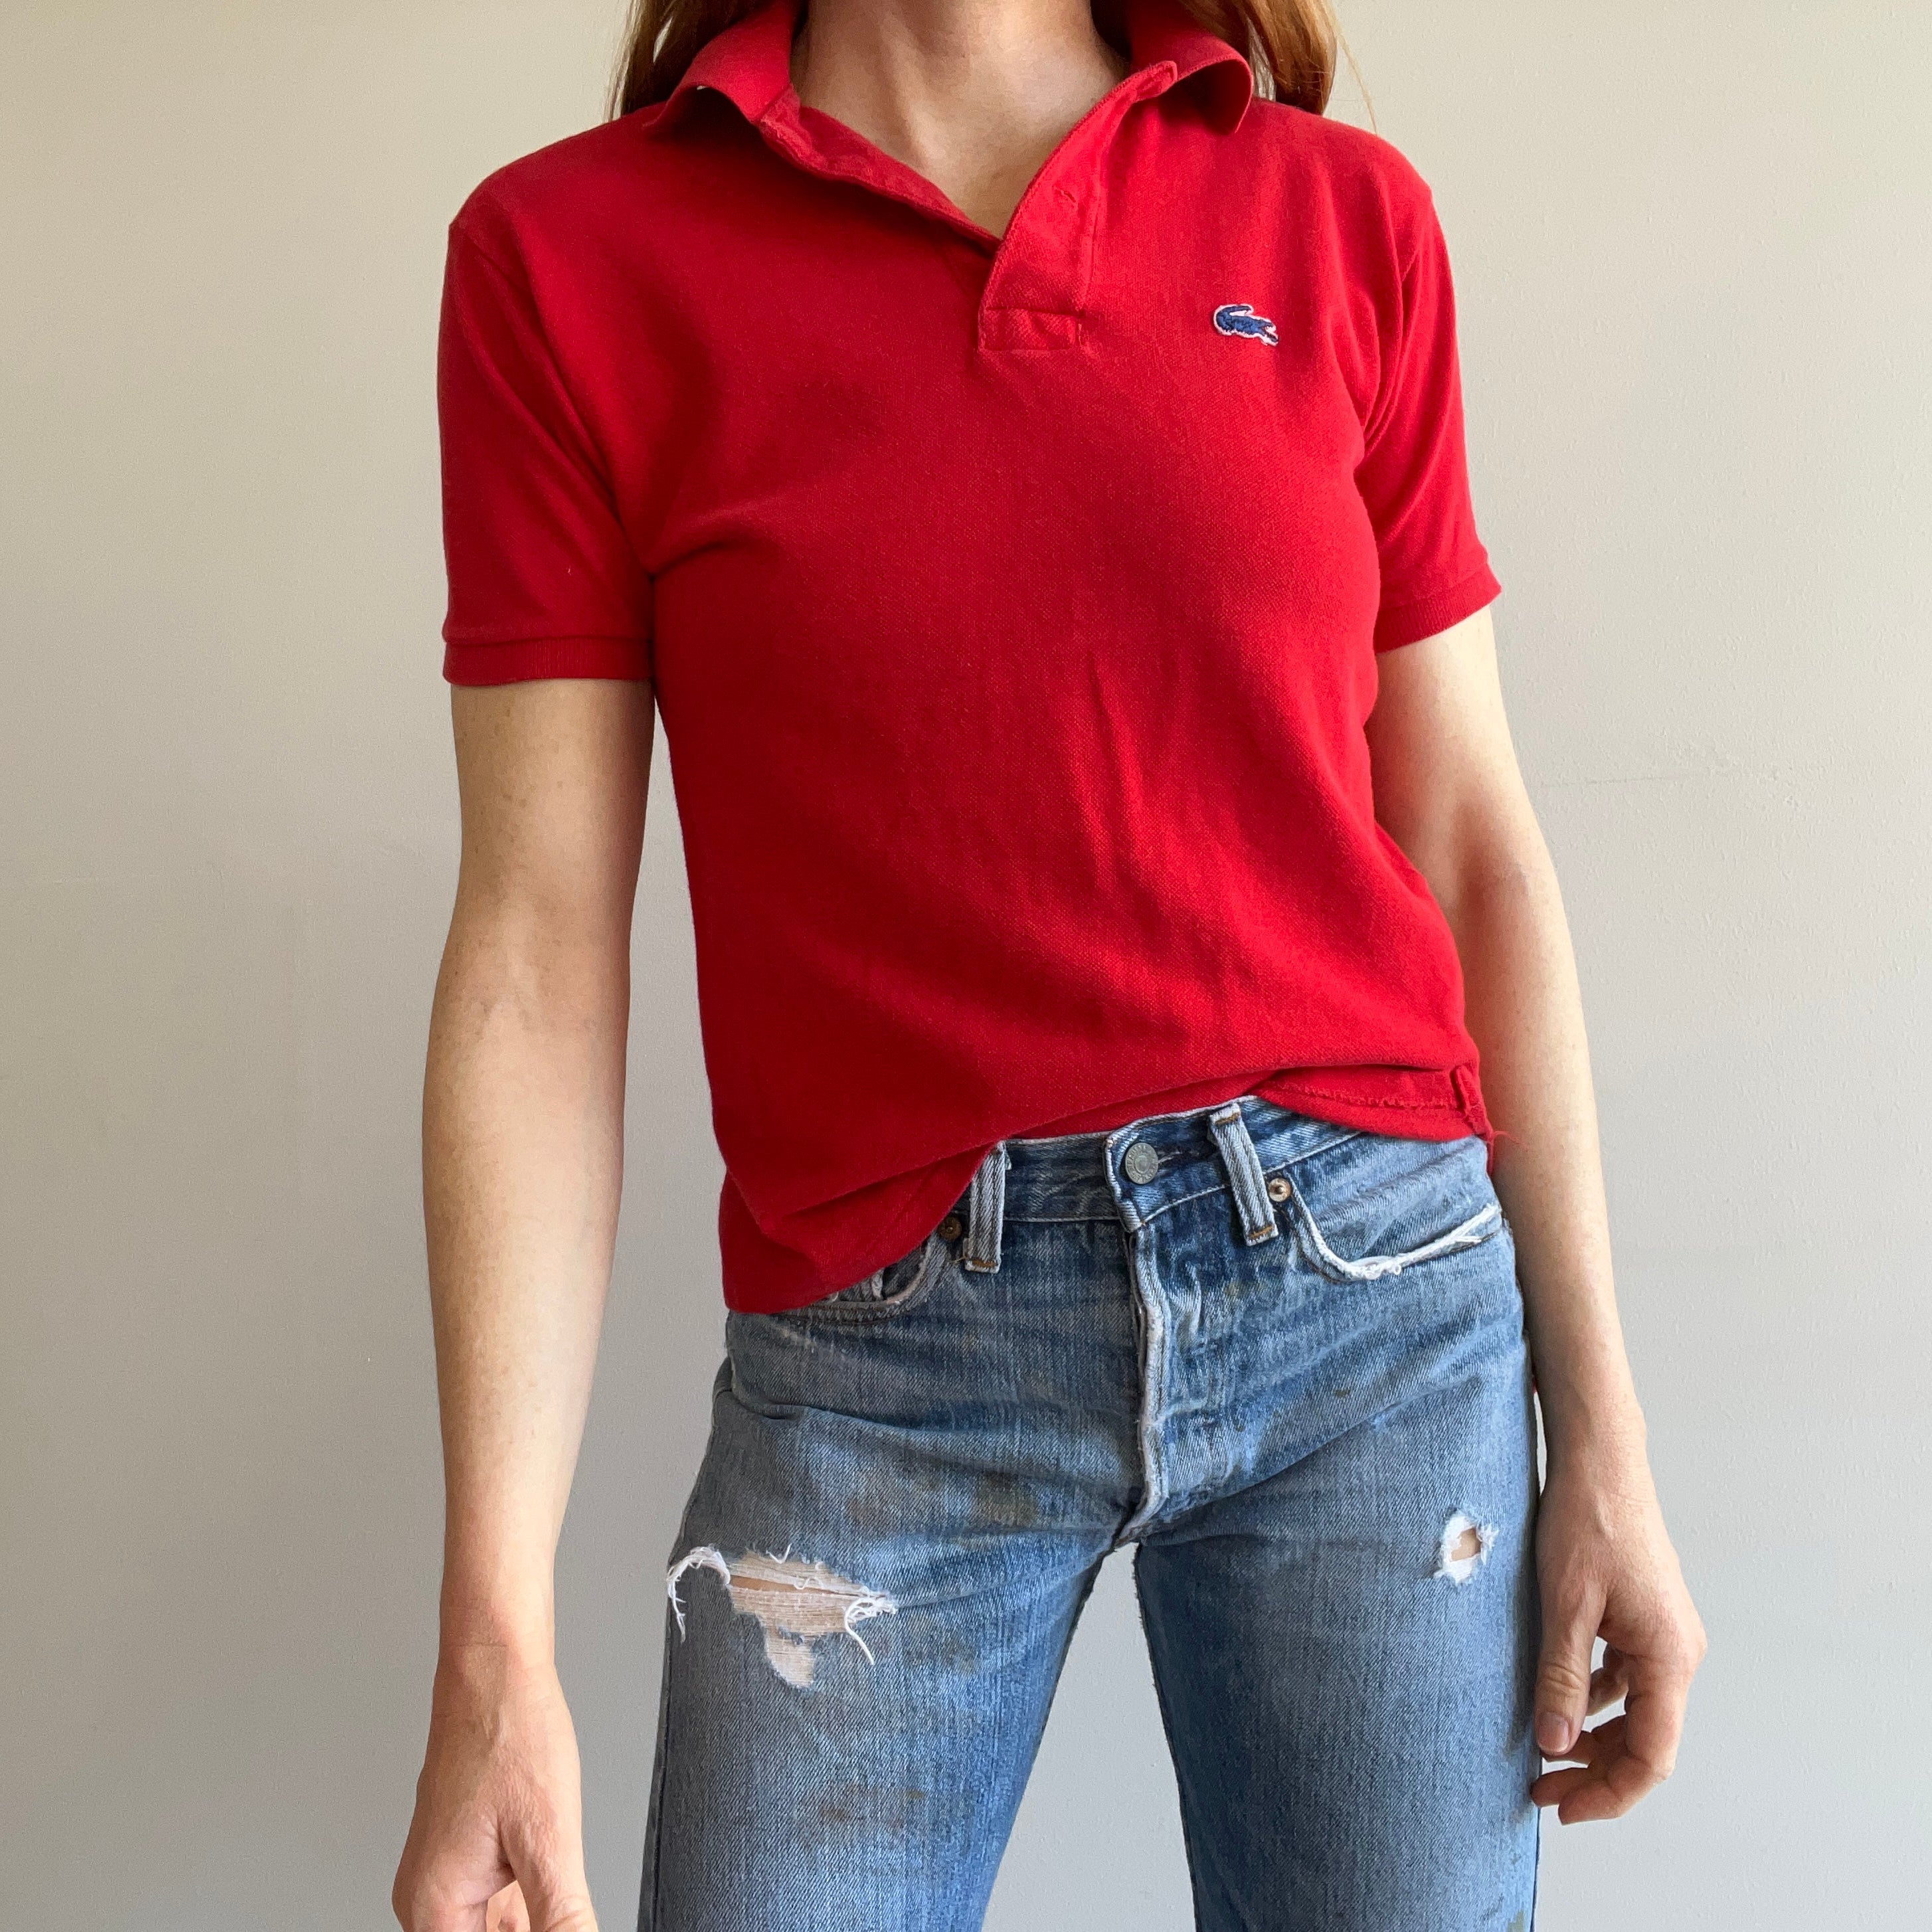 Brooks Brothers x LaCoste 80s Cut Red Polo Shirt Red Vintage Co